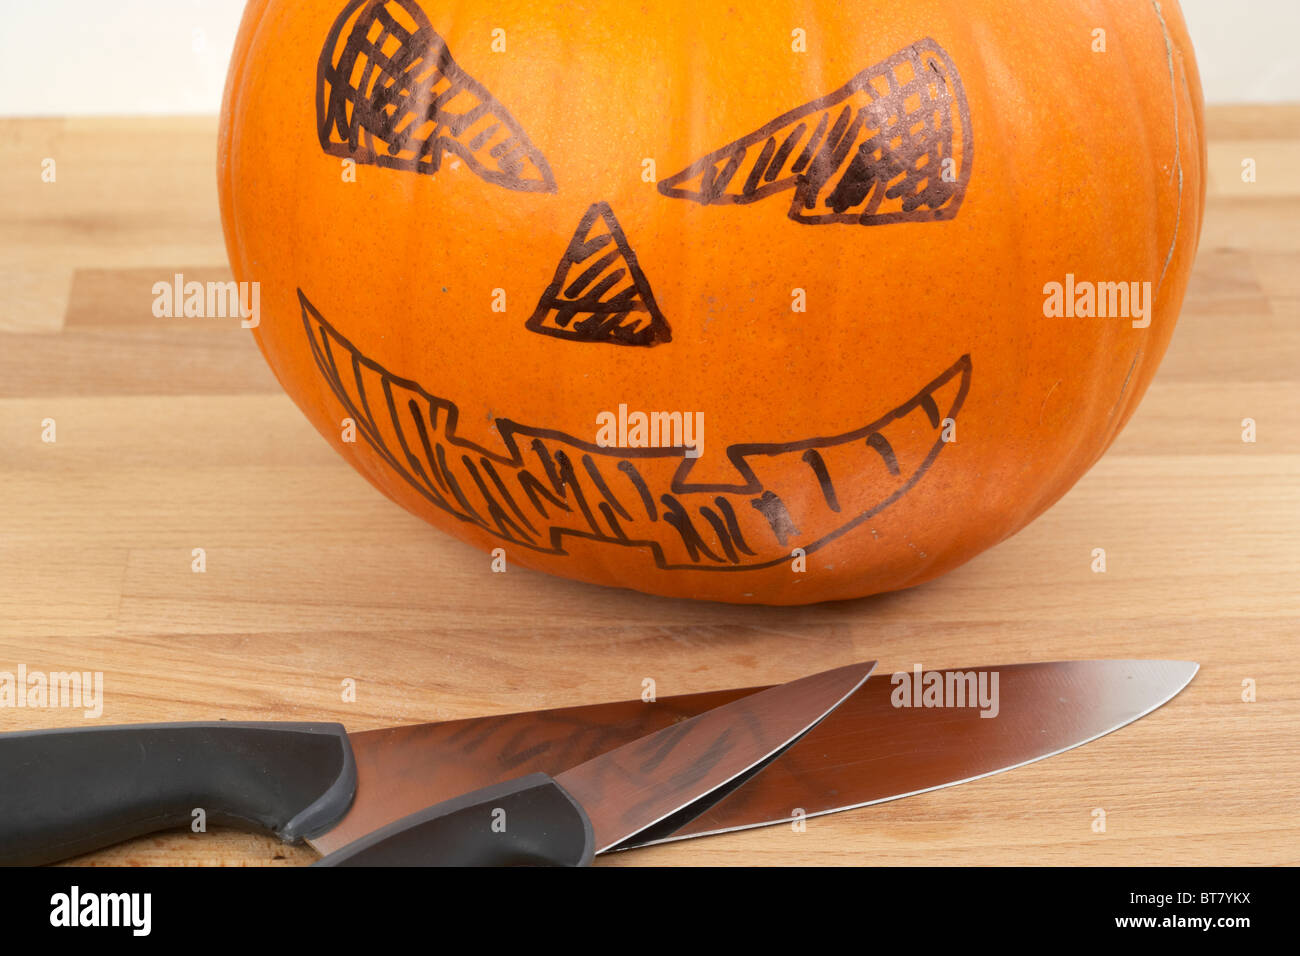 pumpkin ready to be turned into jack-o-lantern with cut outs drawn in pen with knives Stock Photo